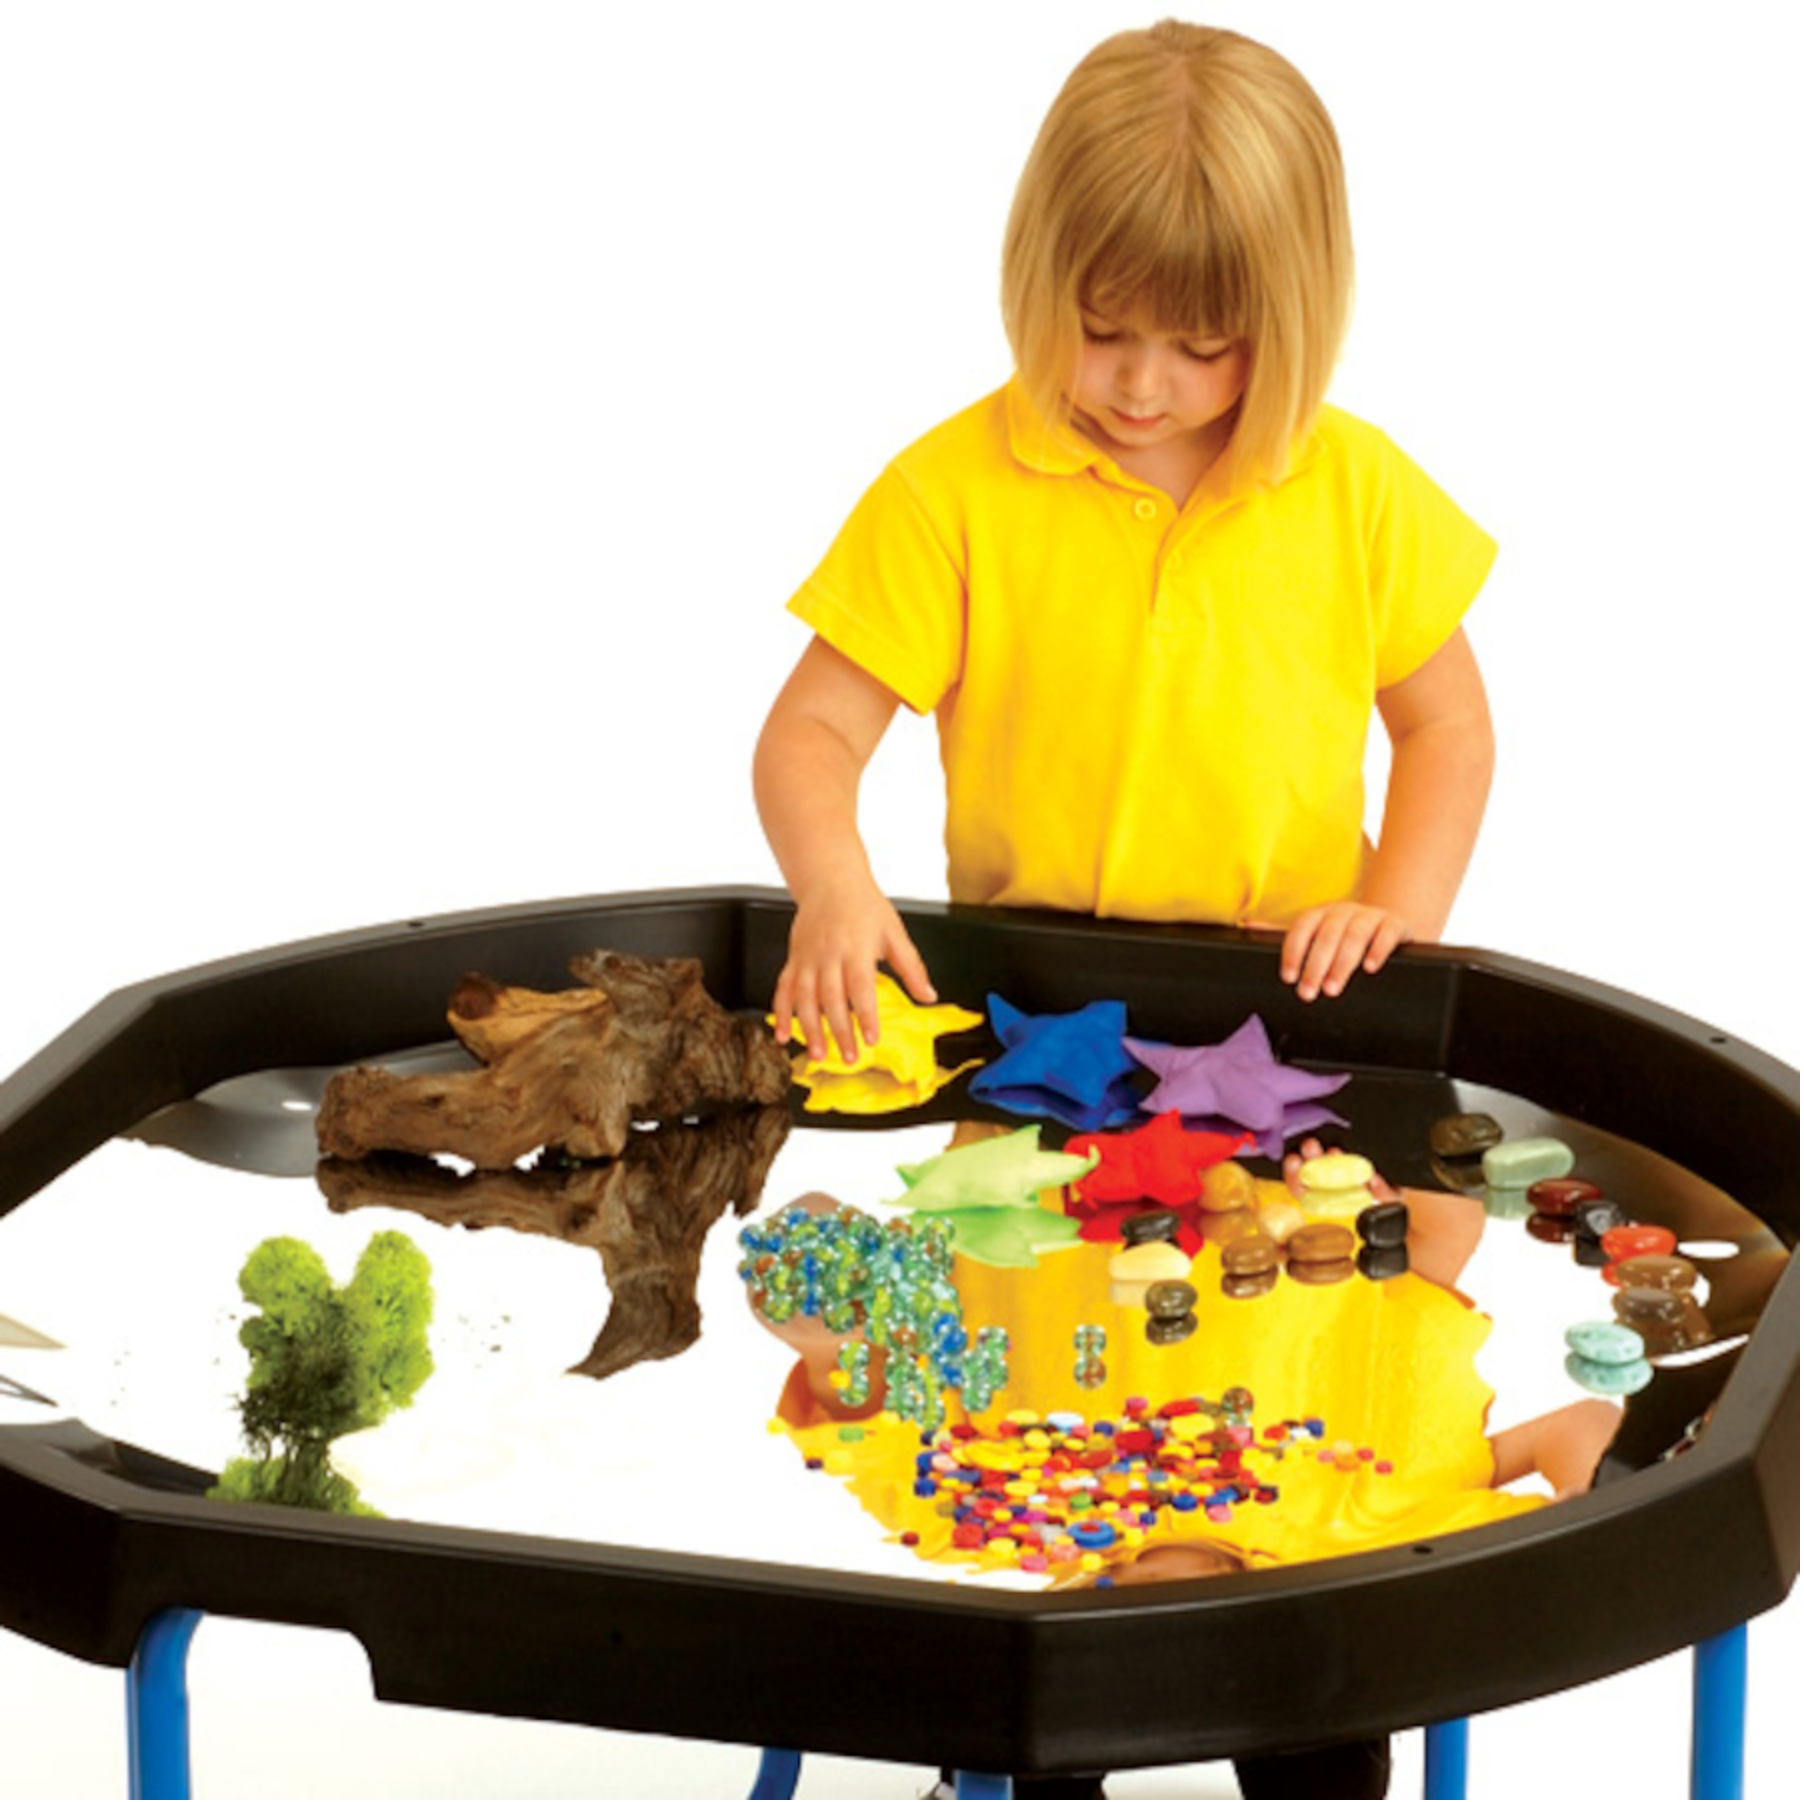 Active World Tuff Tray Stand and Cover Set.